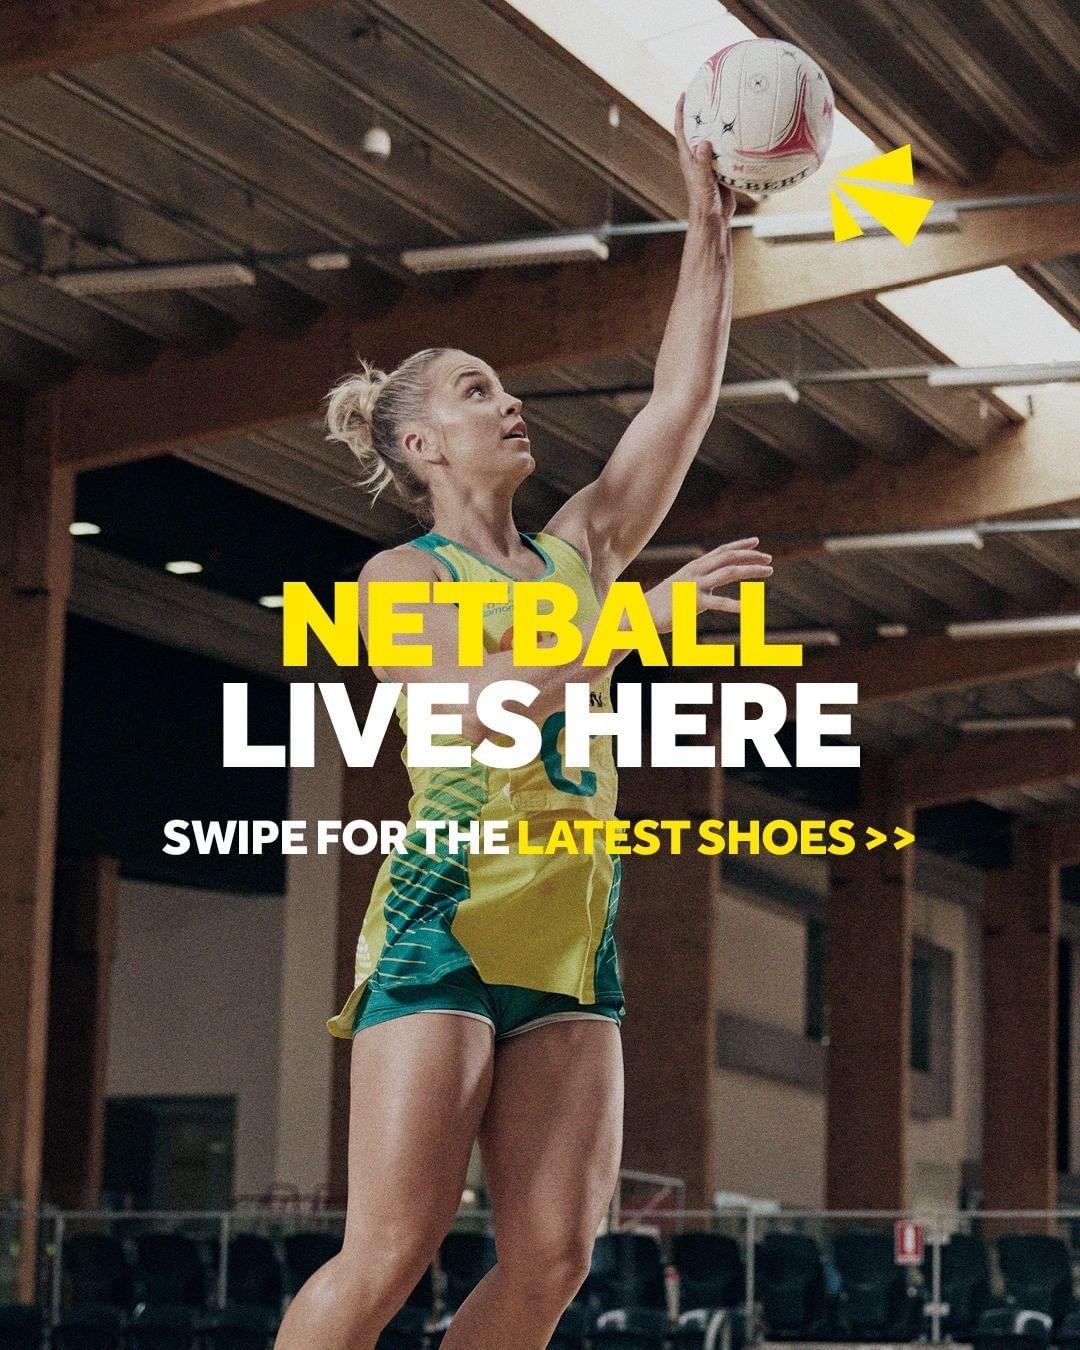 class="content__text"
 Step into the netball season with confidence and style 💥 
The new ASICS netball range with colours exclusive to rebel.
.
.
.
 #rebelsport #sportiscalling #netball #asics 
 